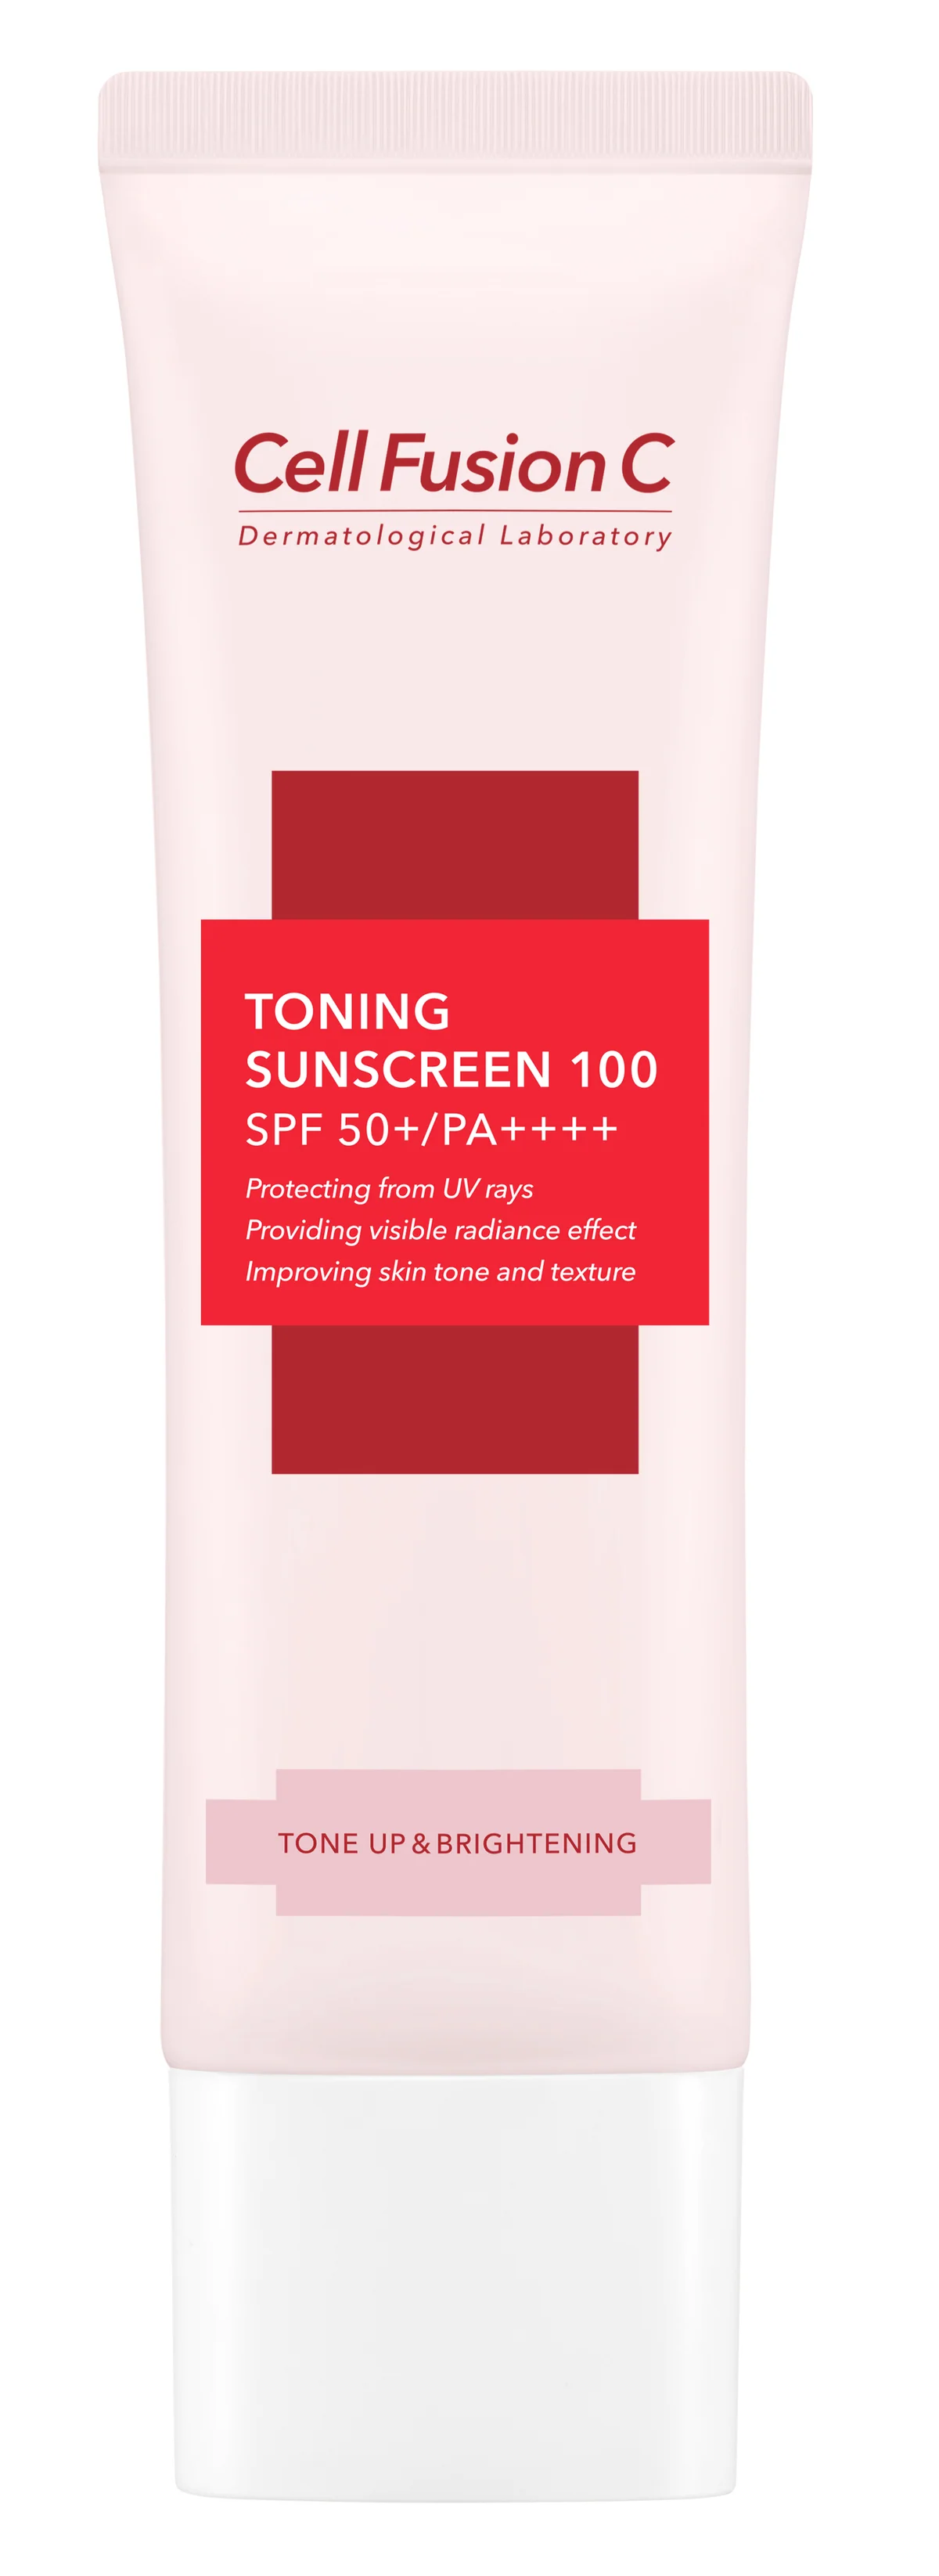 [Cell Fusion C] Toning Sunscreen SPF 50+ / PA++++